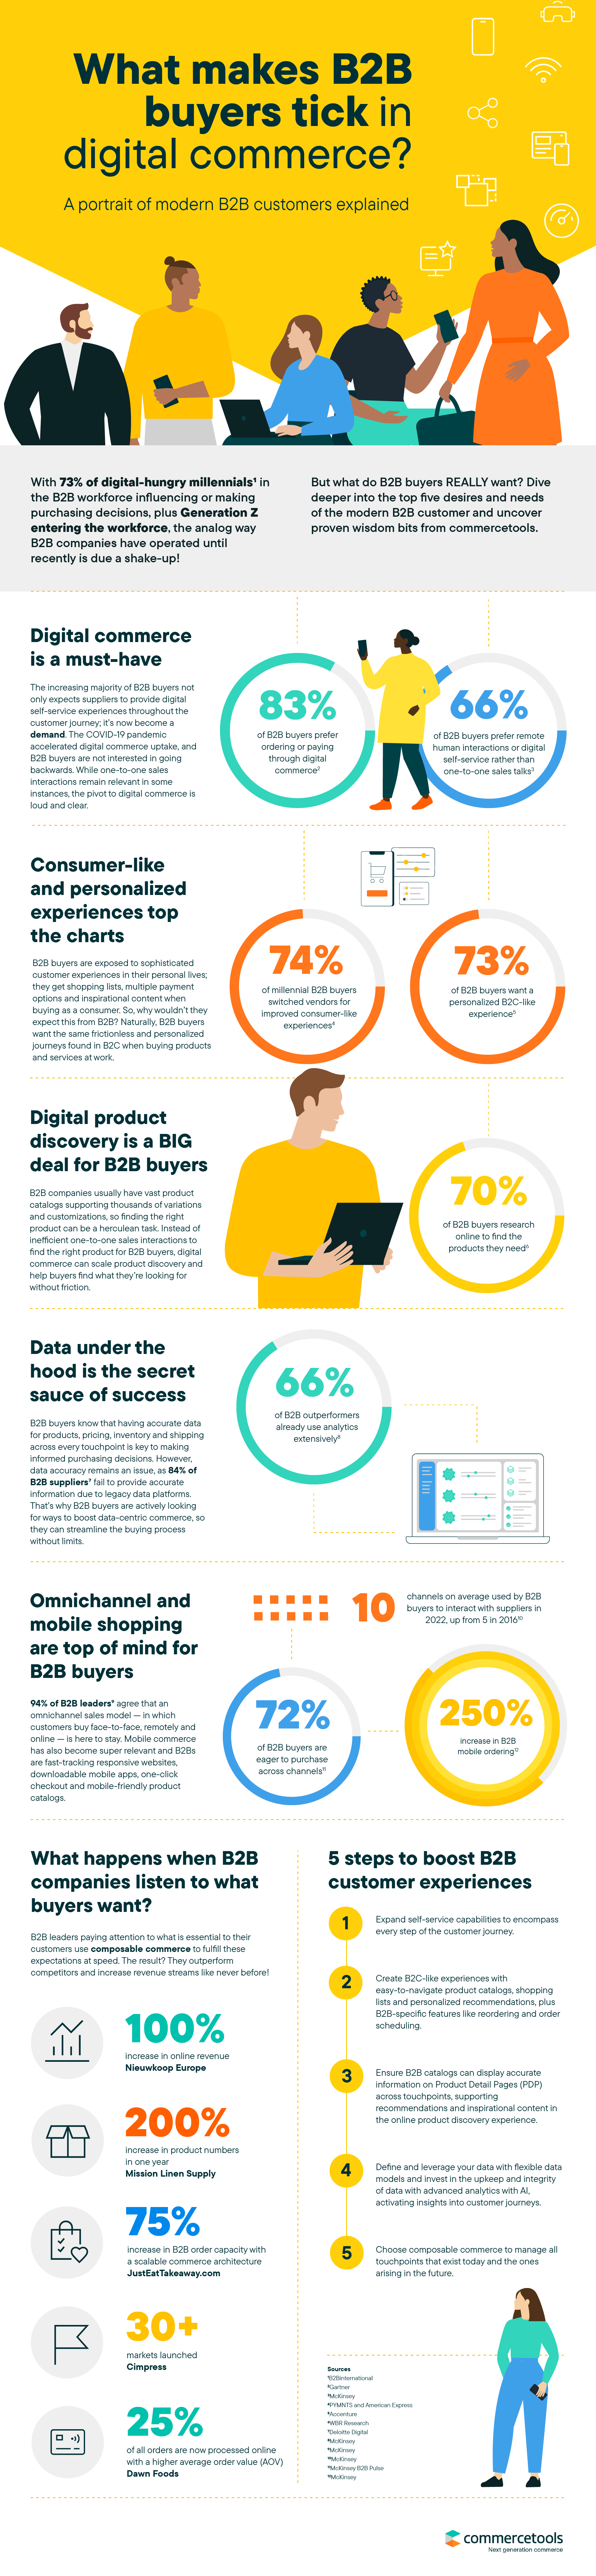 B2B buyers in digital commerce infographic by commercetools.